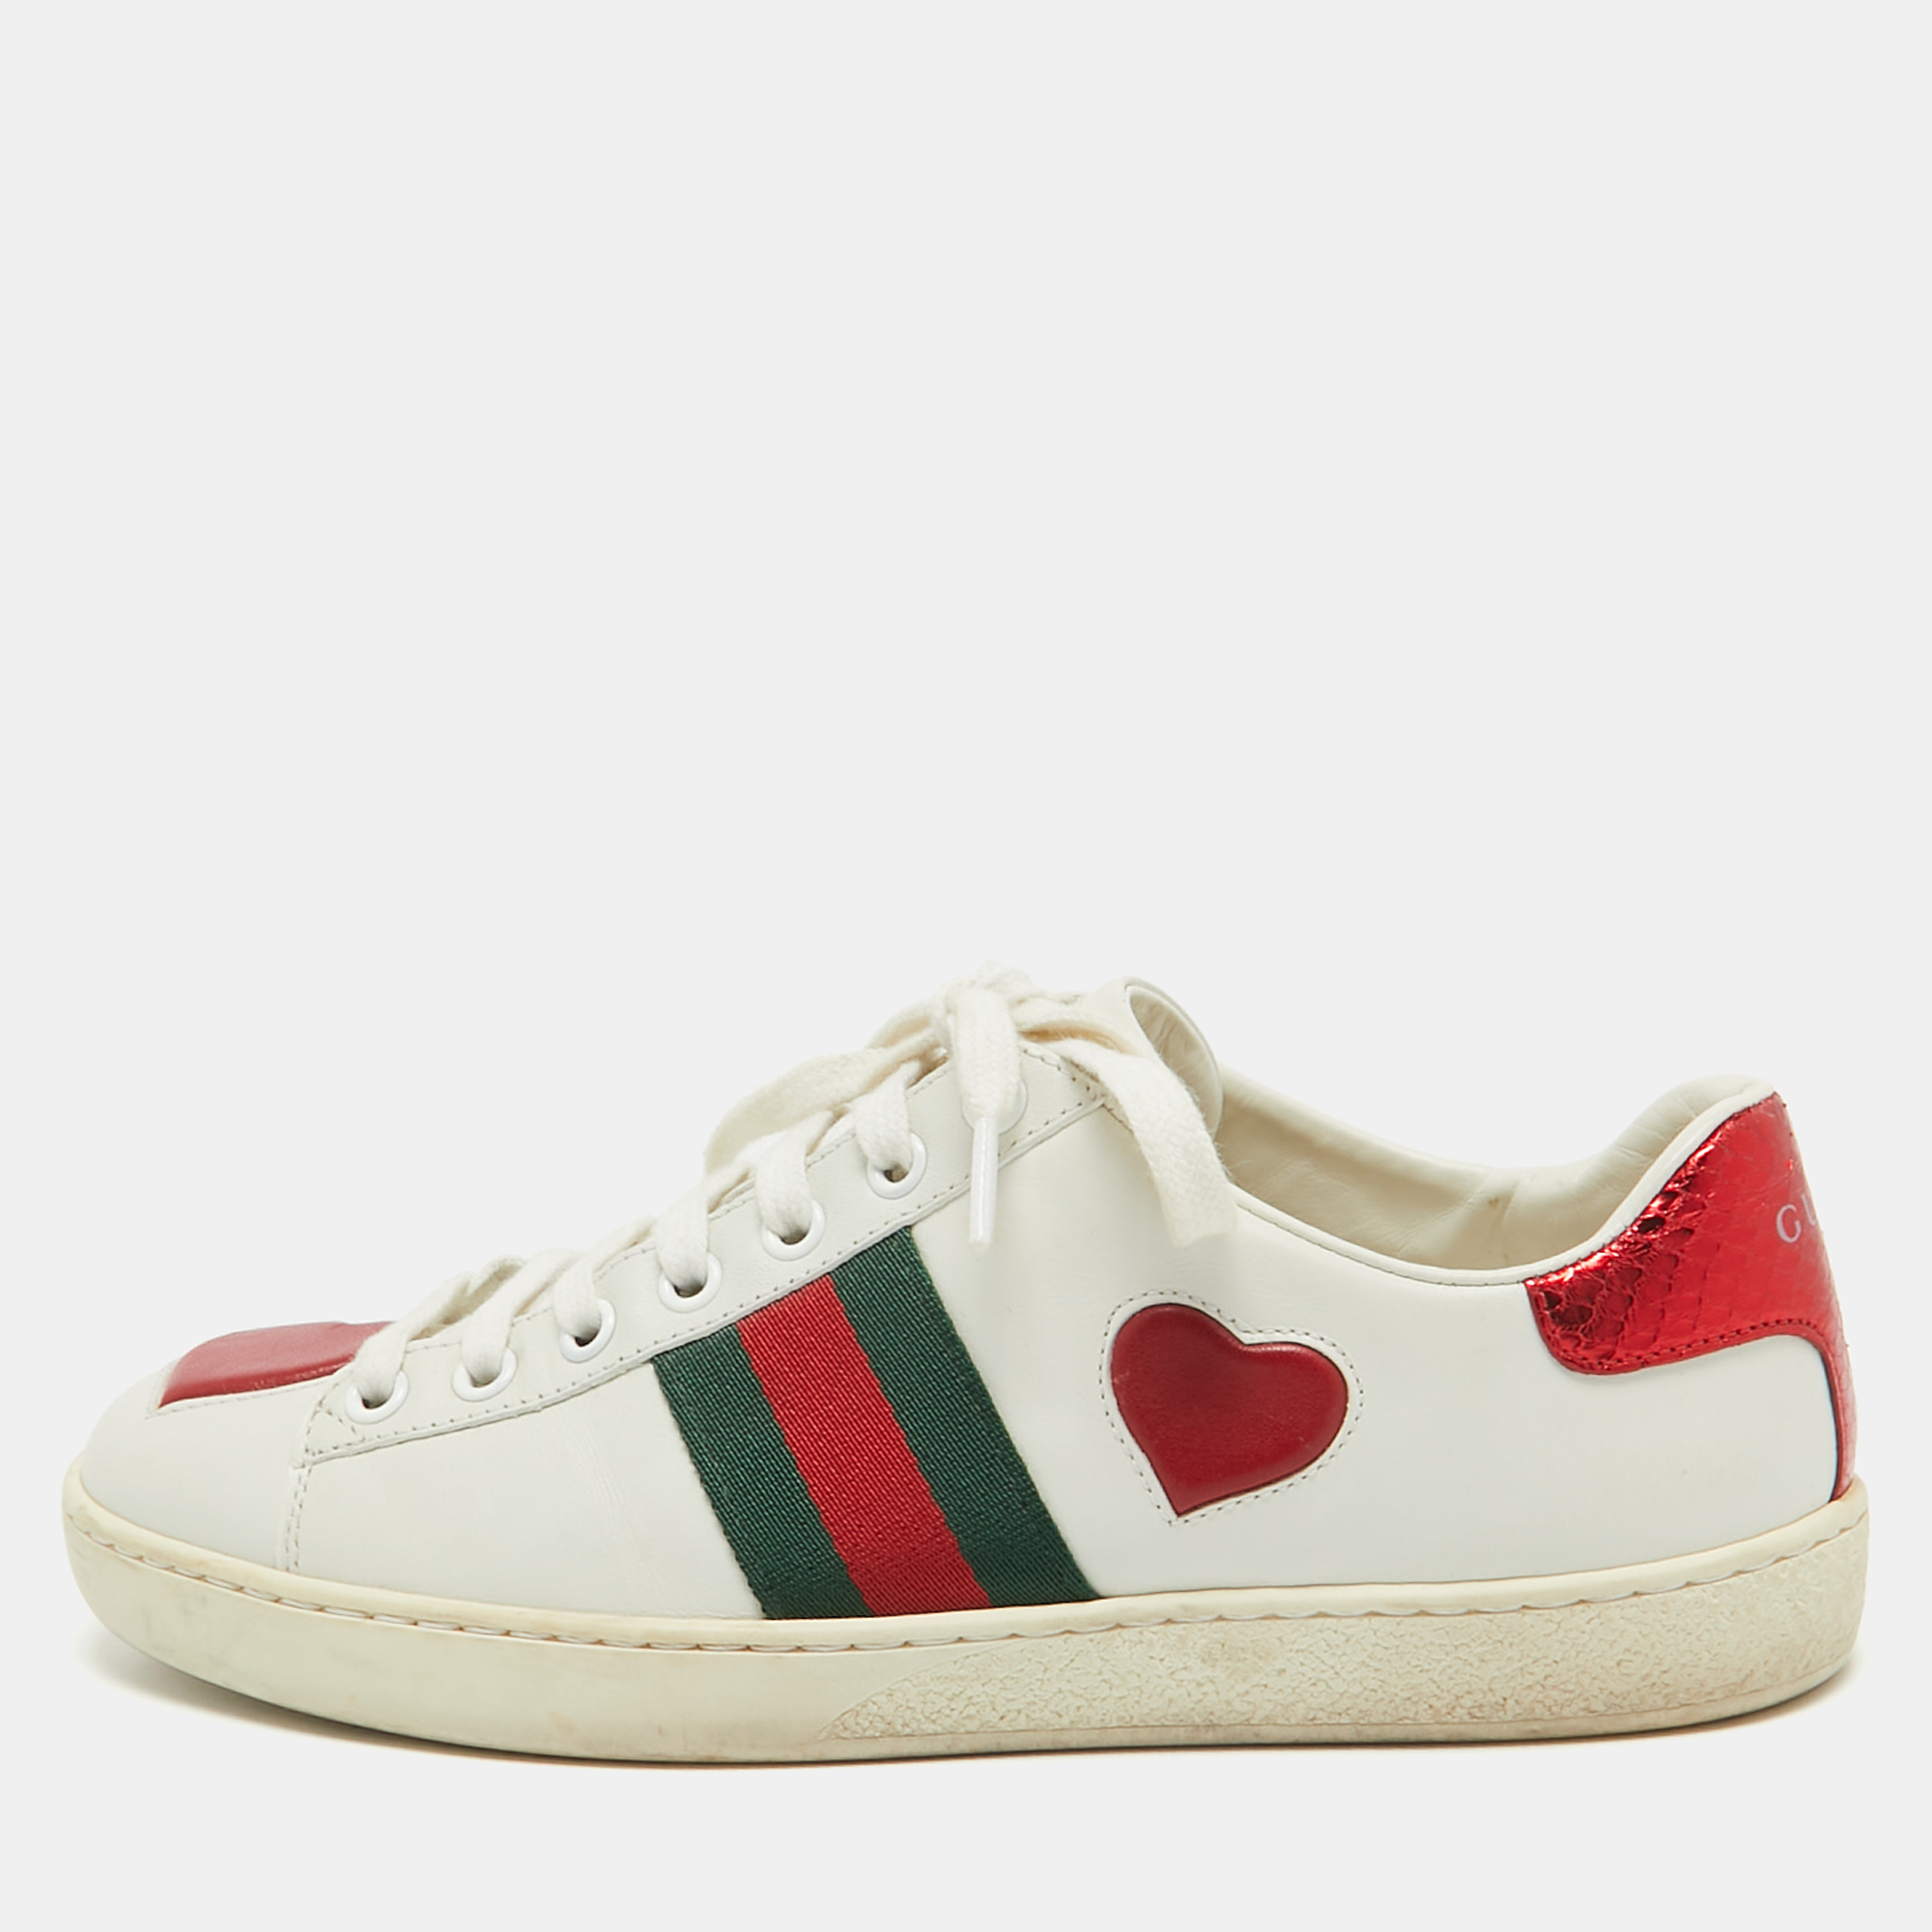 Gucci white leather heart ace sneakers size 36